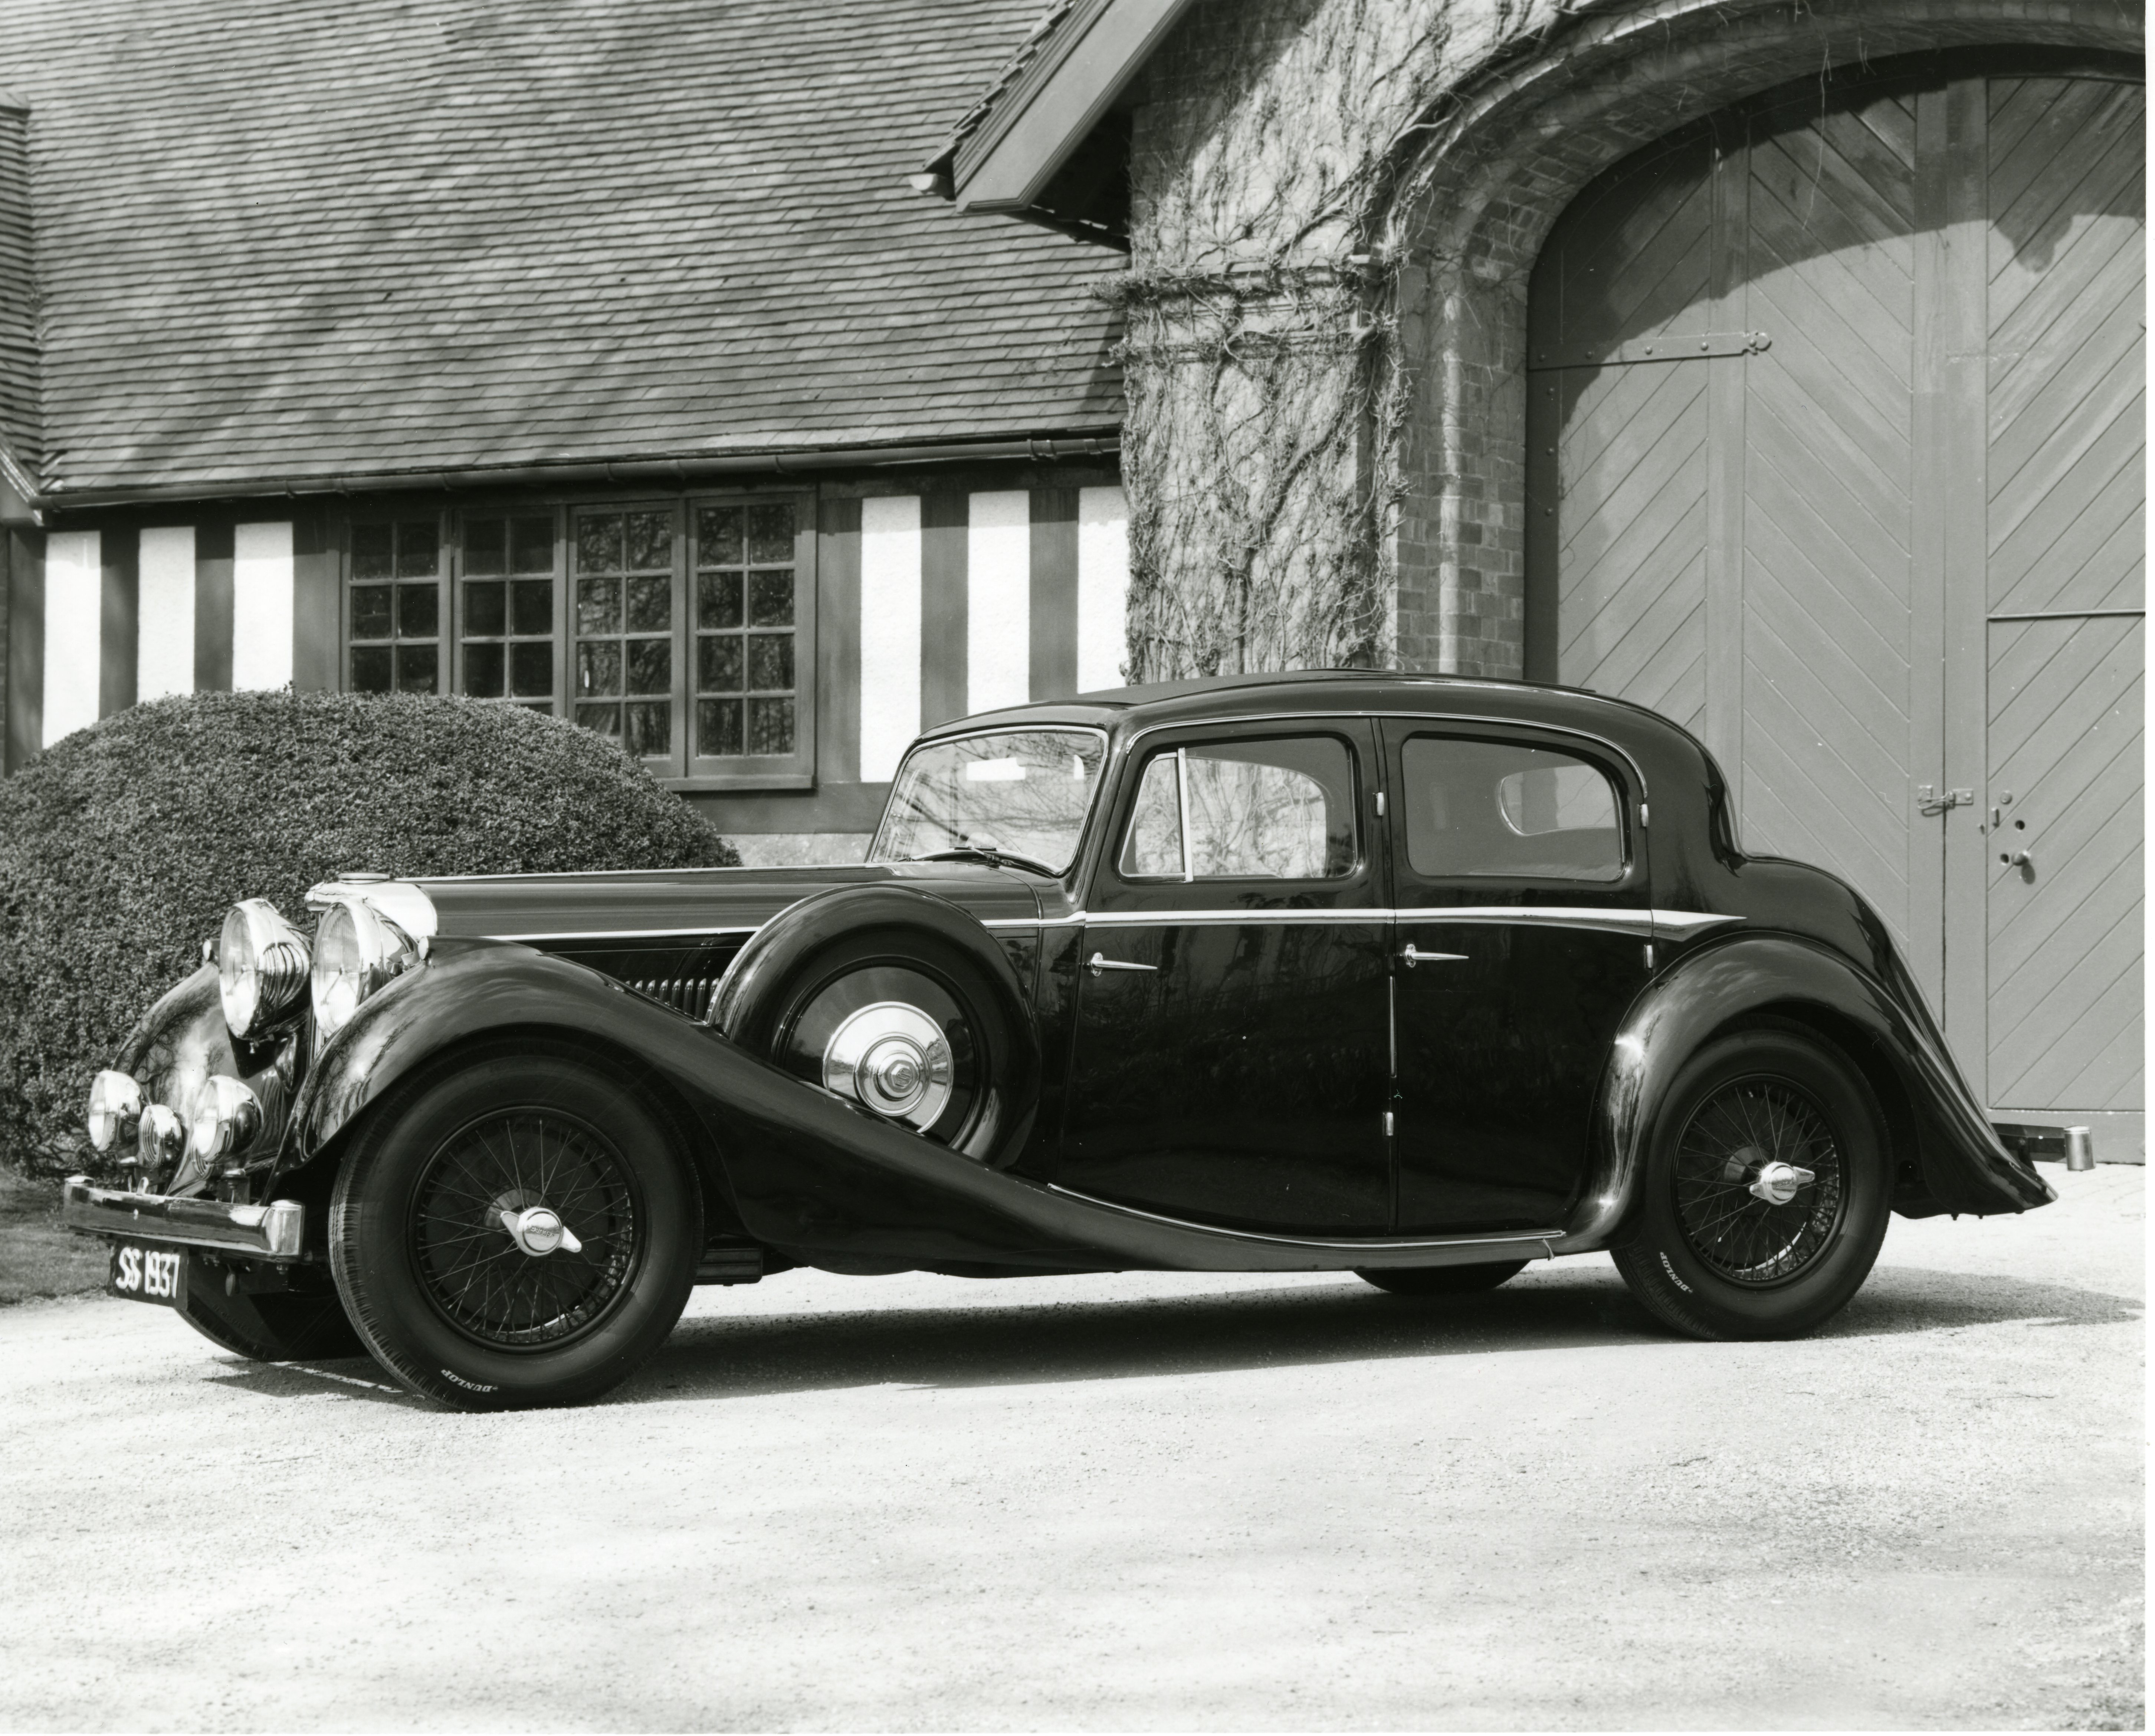 This 1937 Jaguar SS100, one of a production run of about 300, was one of the first cars the company made. While its styling clearly evolved in the decades that followed, sleek lines and sporty curves were evident. All images courtesy of Jaguar Land Rover North American Archives.